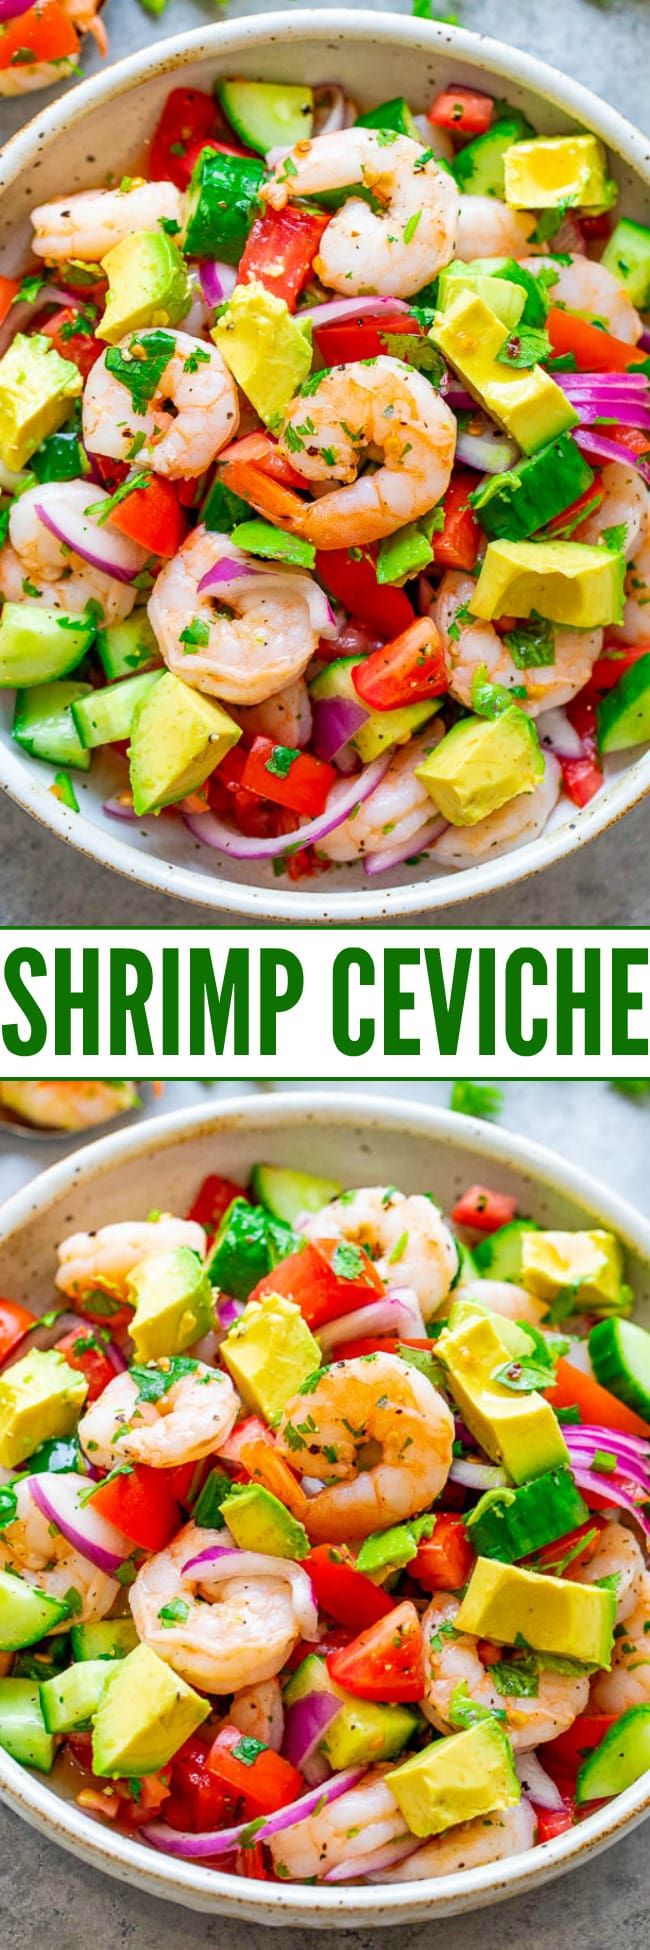 Shrimp Ceviche - The EASIEST way to make traditional shrimp ceviche and it tastes the BEST!! Ready in 30 minutes, great as an appetizer, side, or as a healthy main course that everyone LOVES!! 